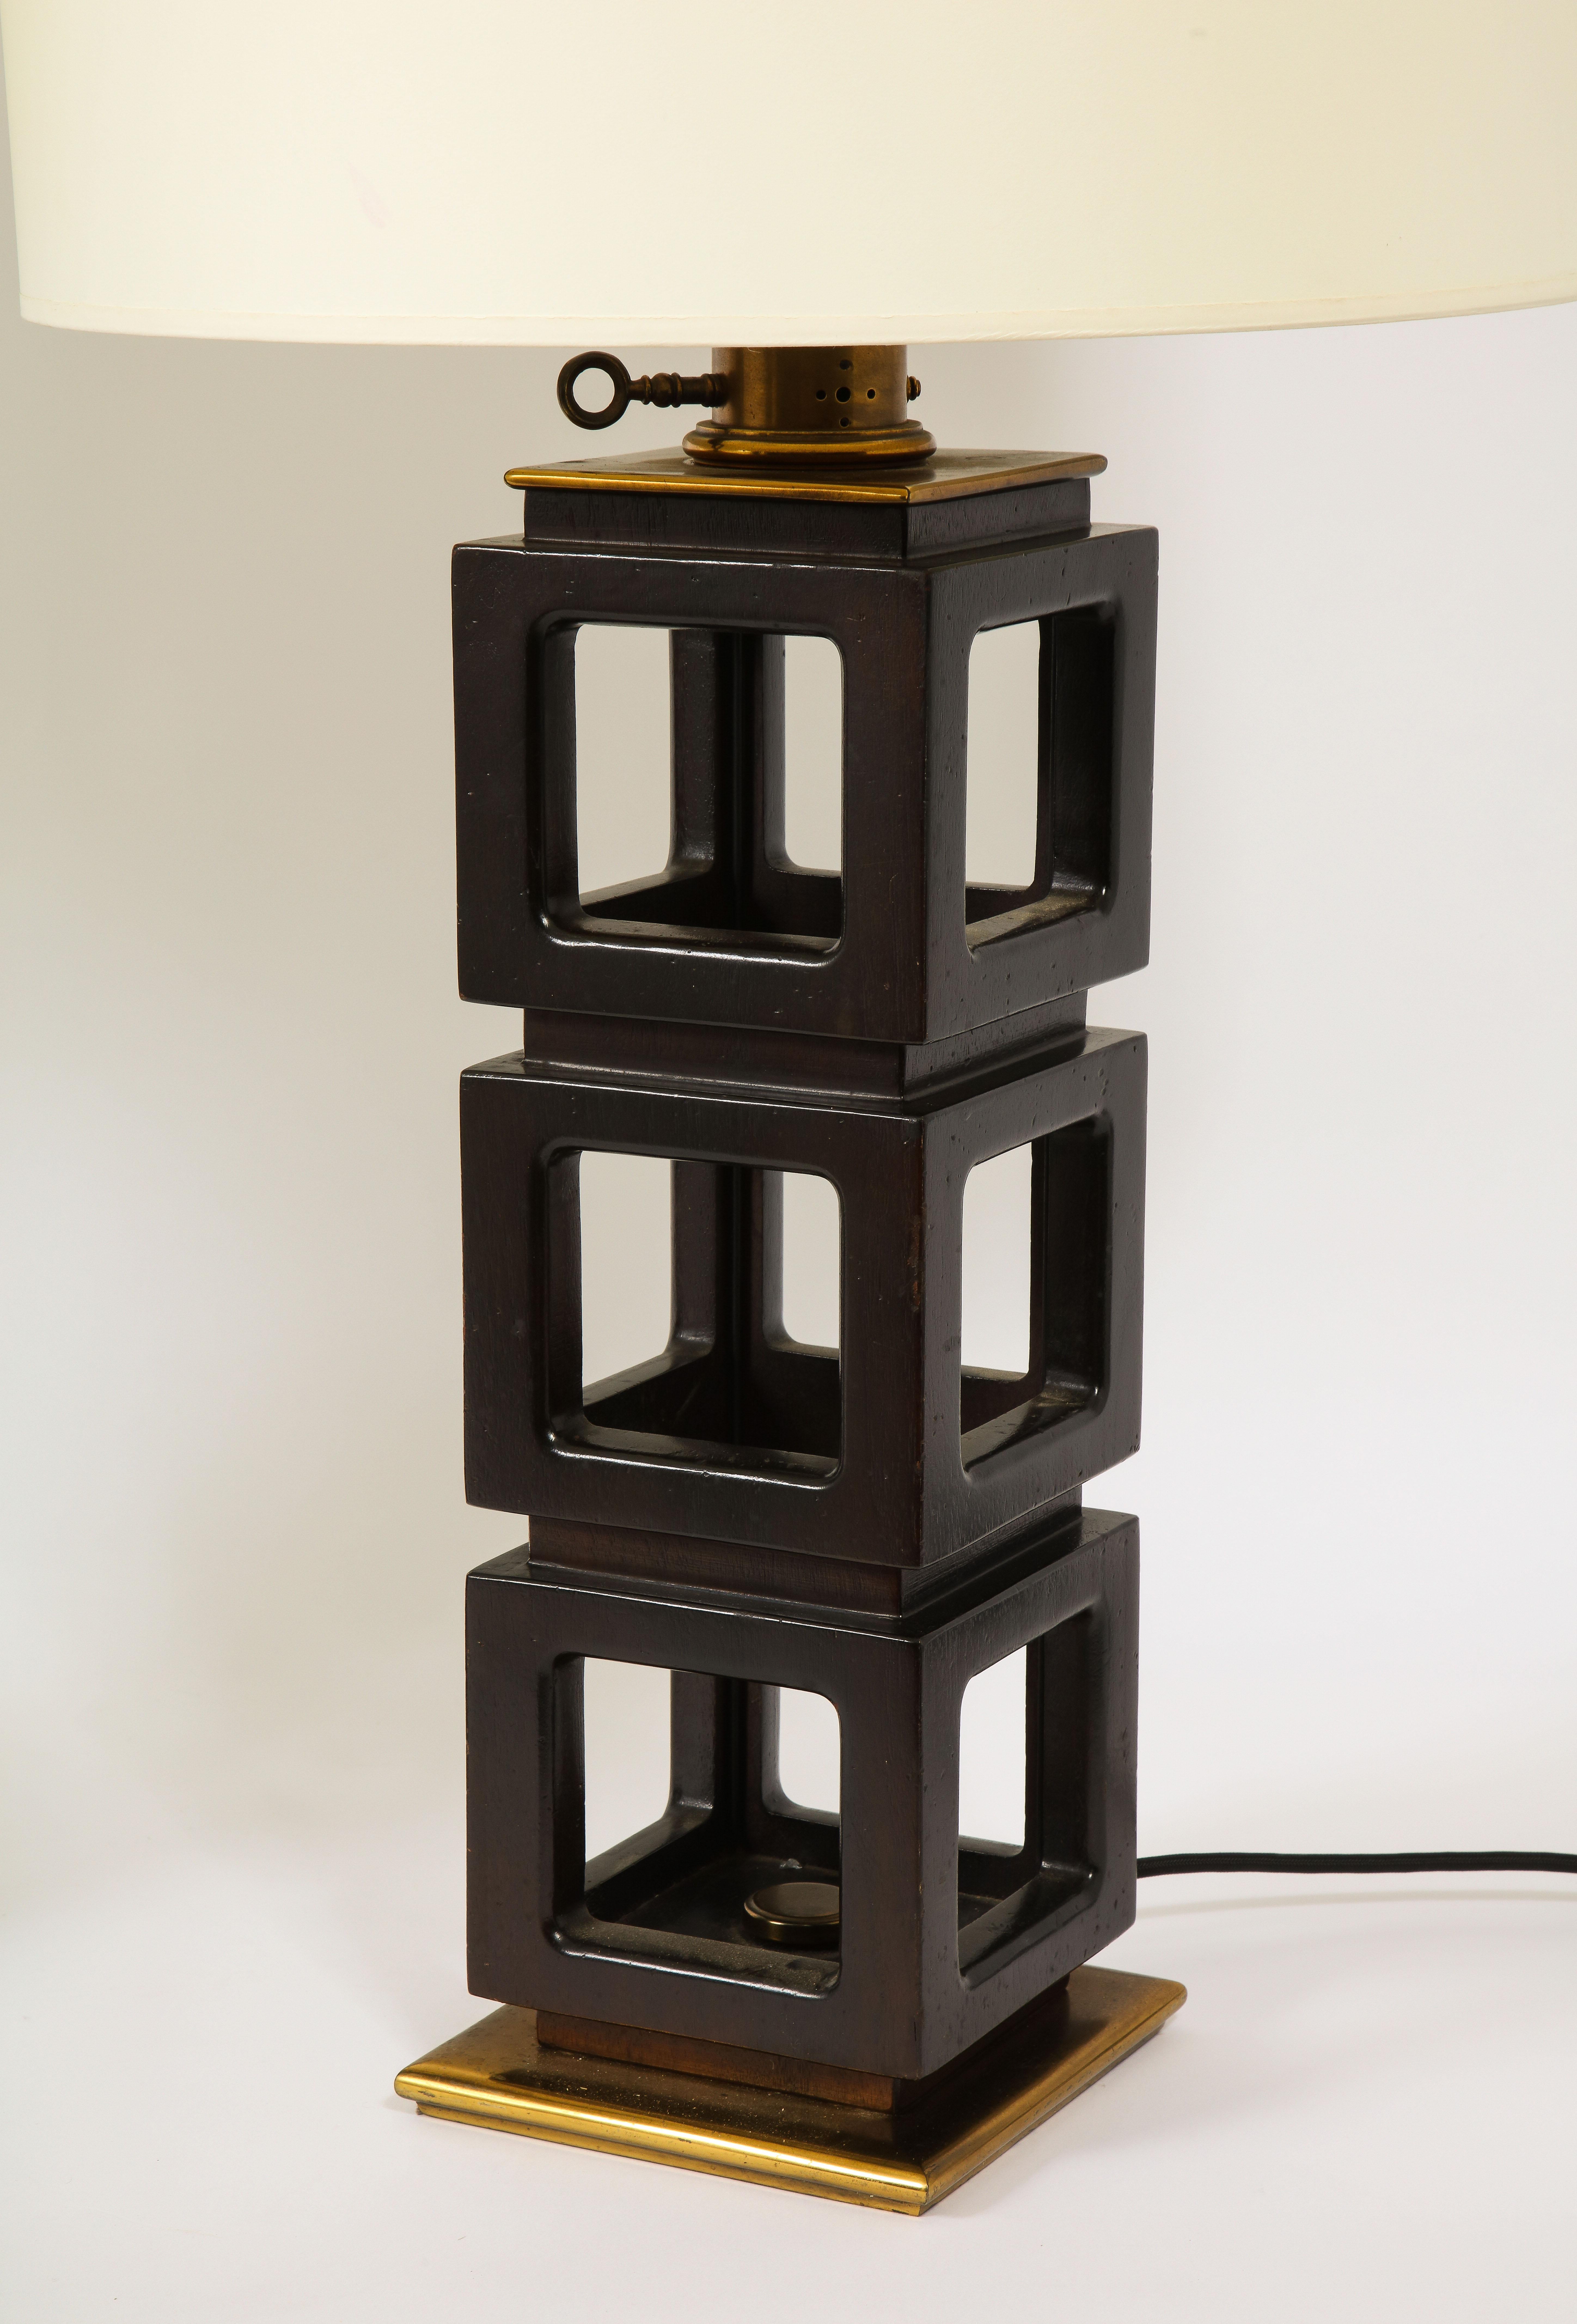 Imposing pair of stacked walnut and brass lamps by Stiffel.

Shades not included.